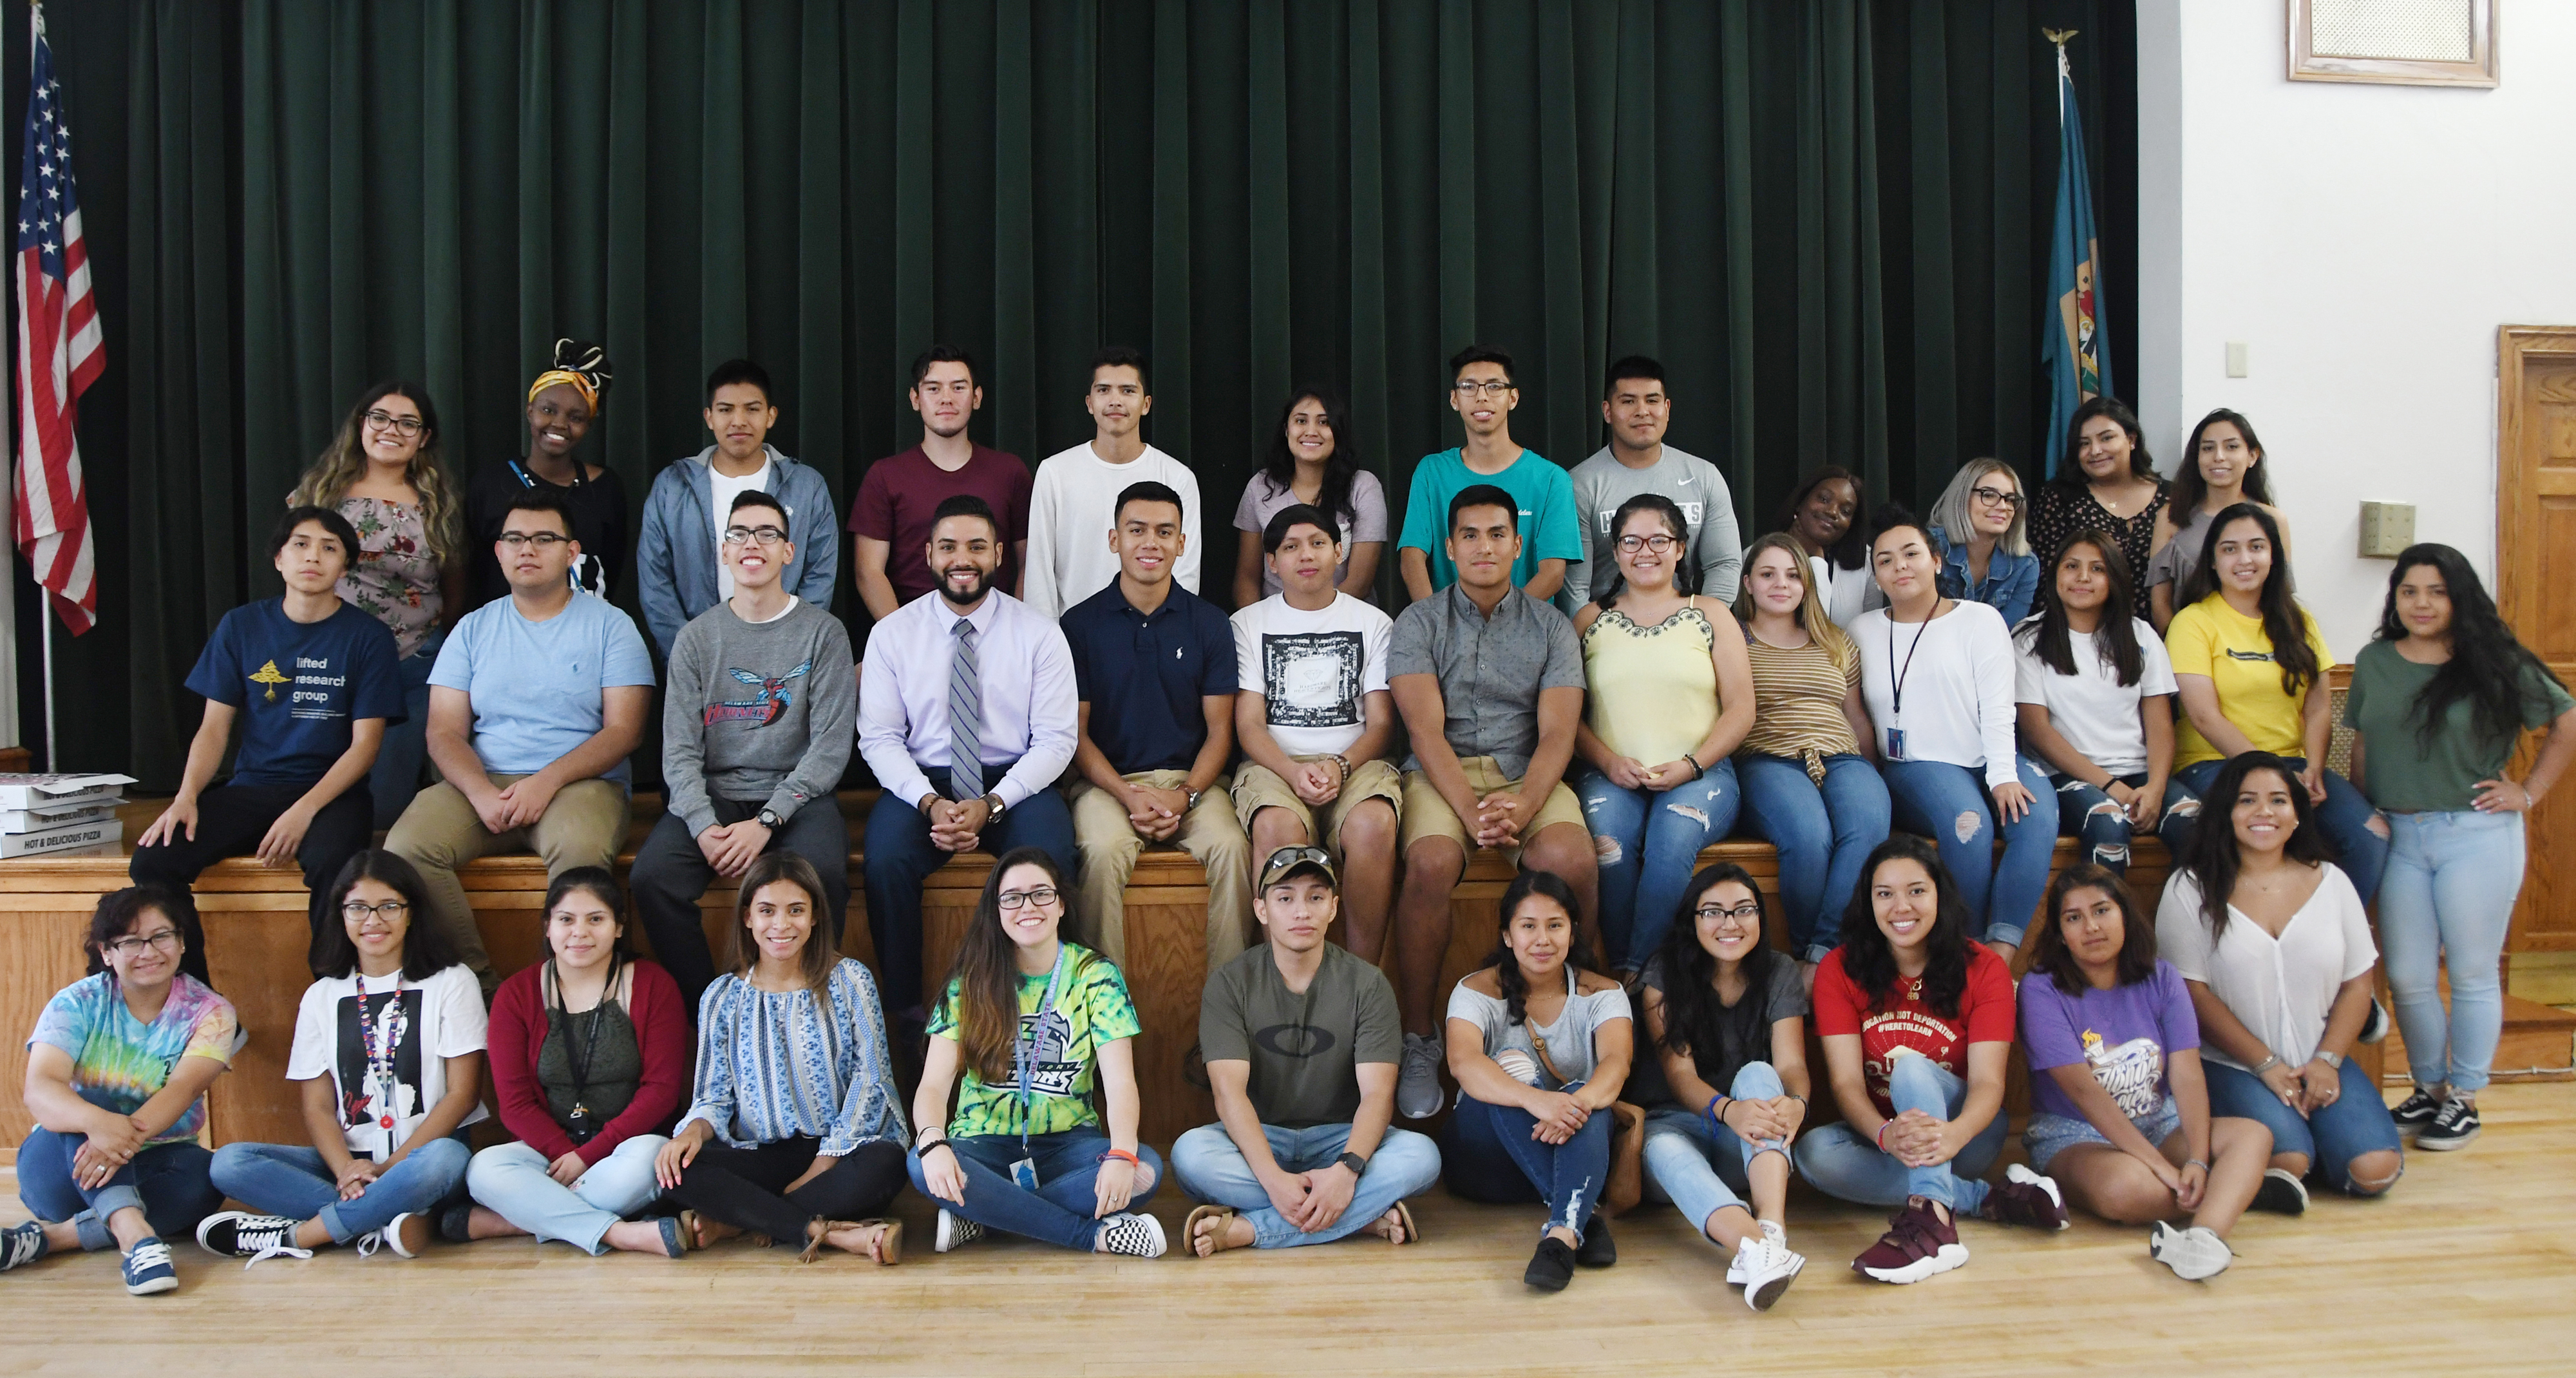 A new freshman class of "Dreamers" have begun their academic journey at DSU this fall. It is the third consecutive school year that DSU has gladly enrolled DACA students as part of the Opportunity Scholarship Program.